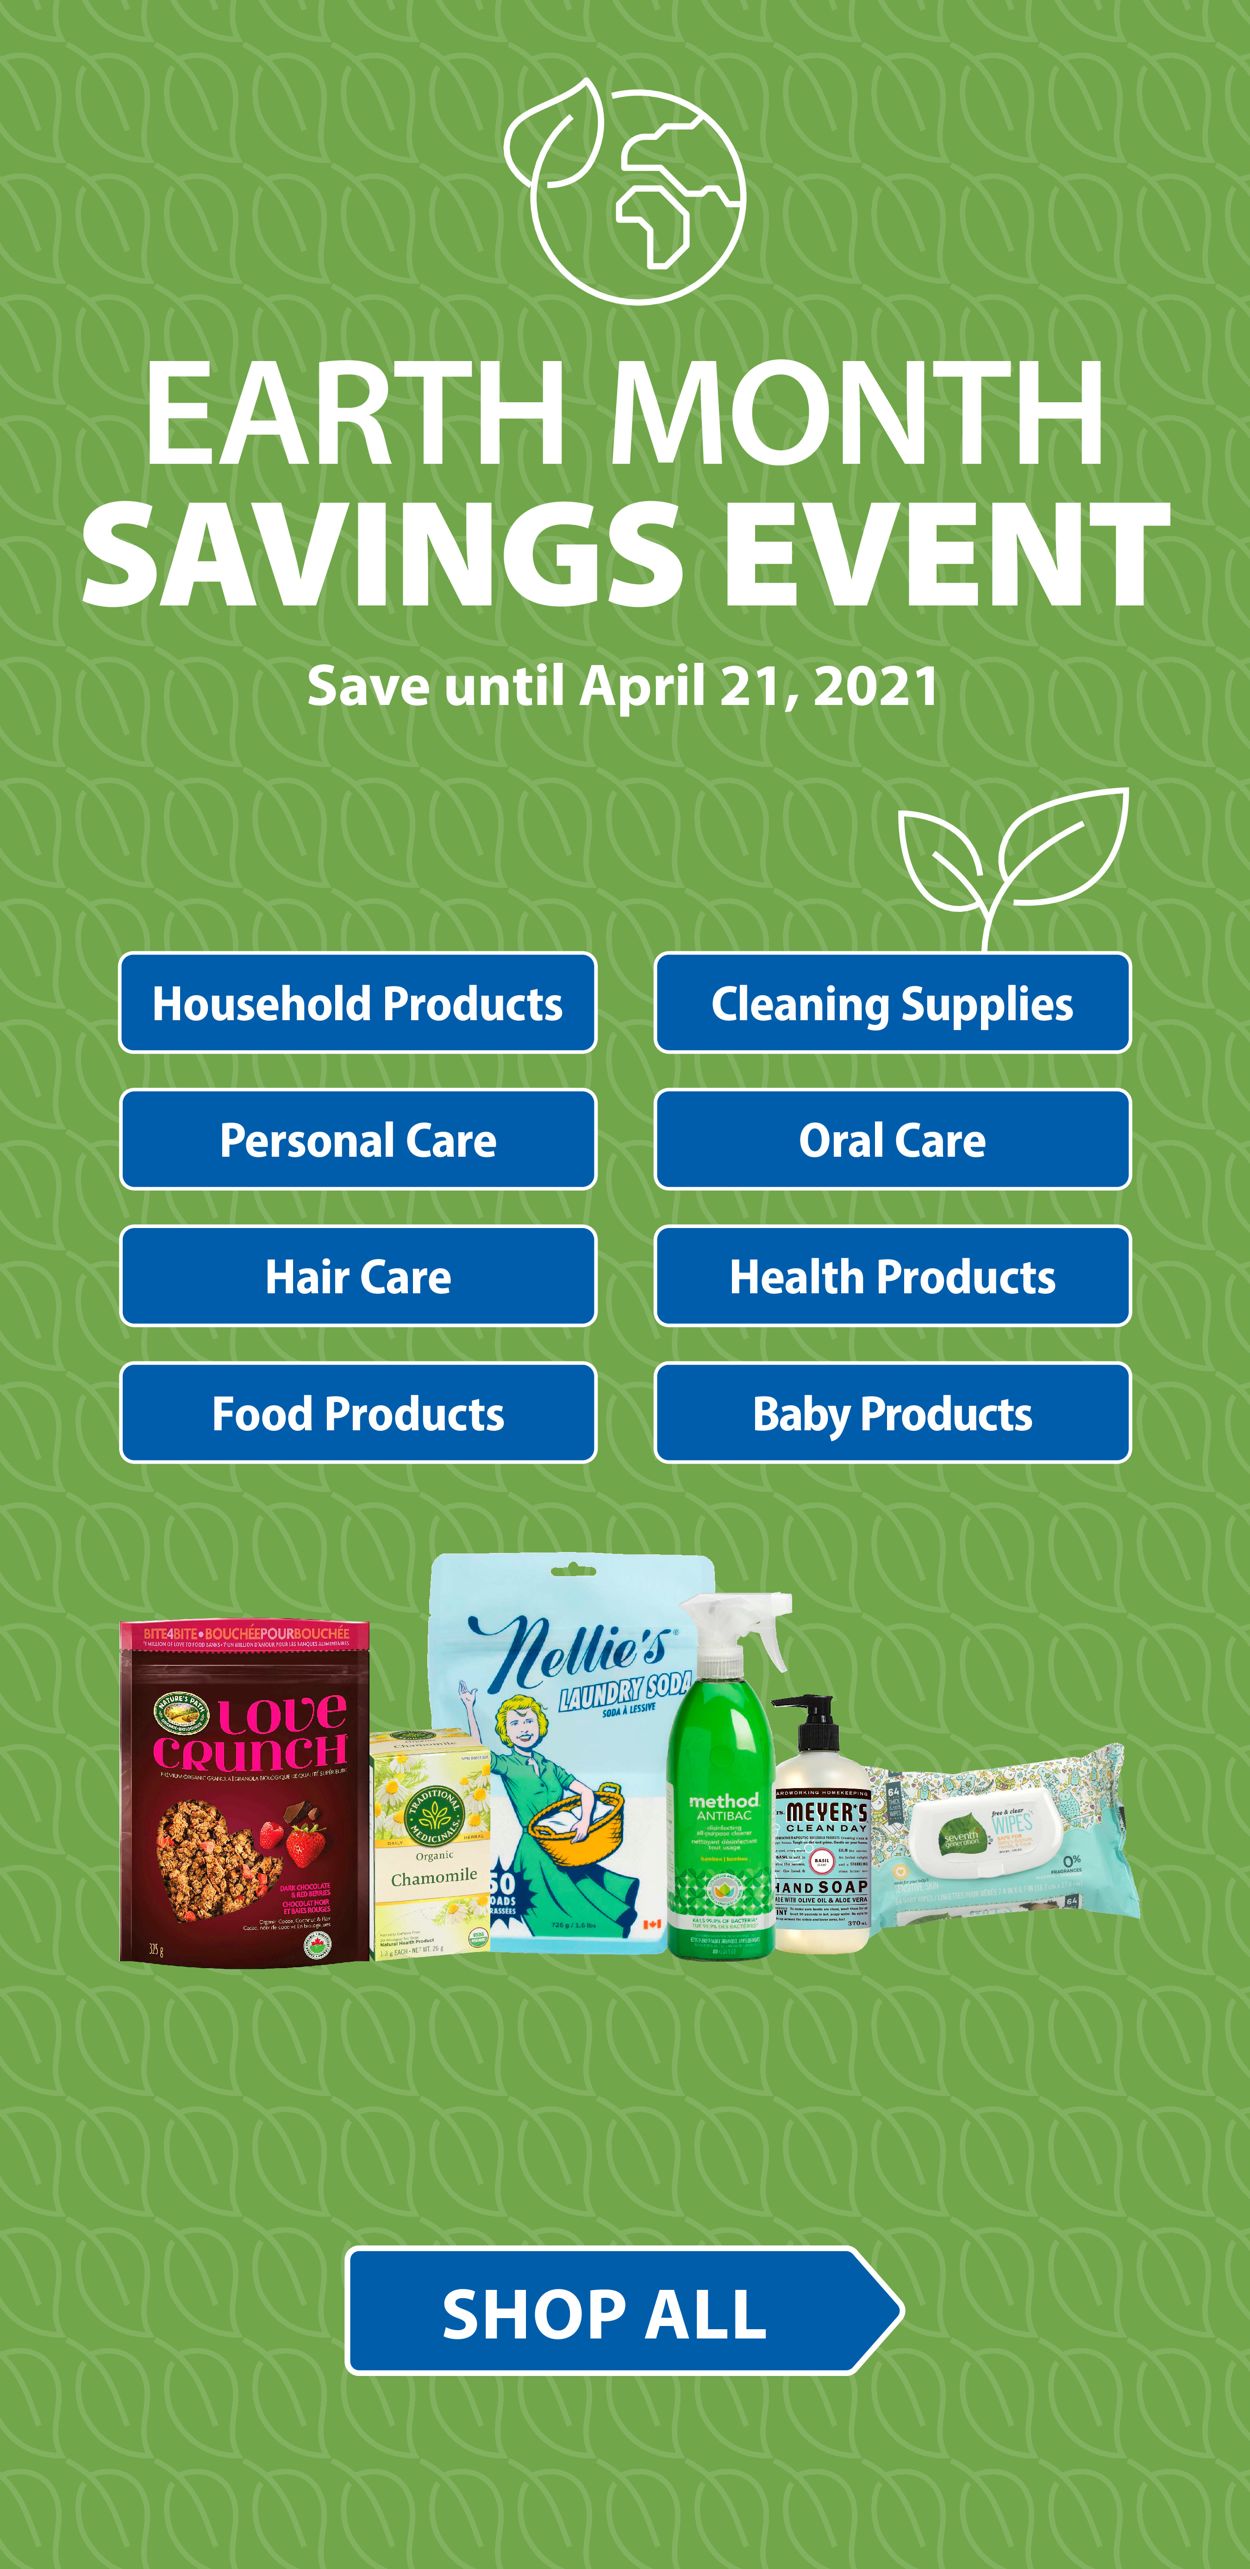 London Drugs Flyer from 04/16/2021